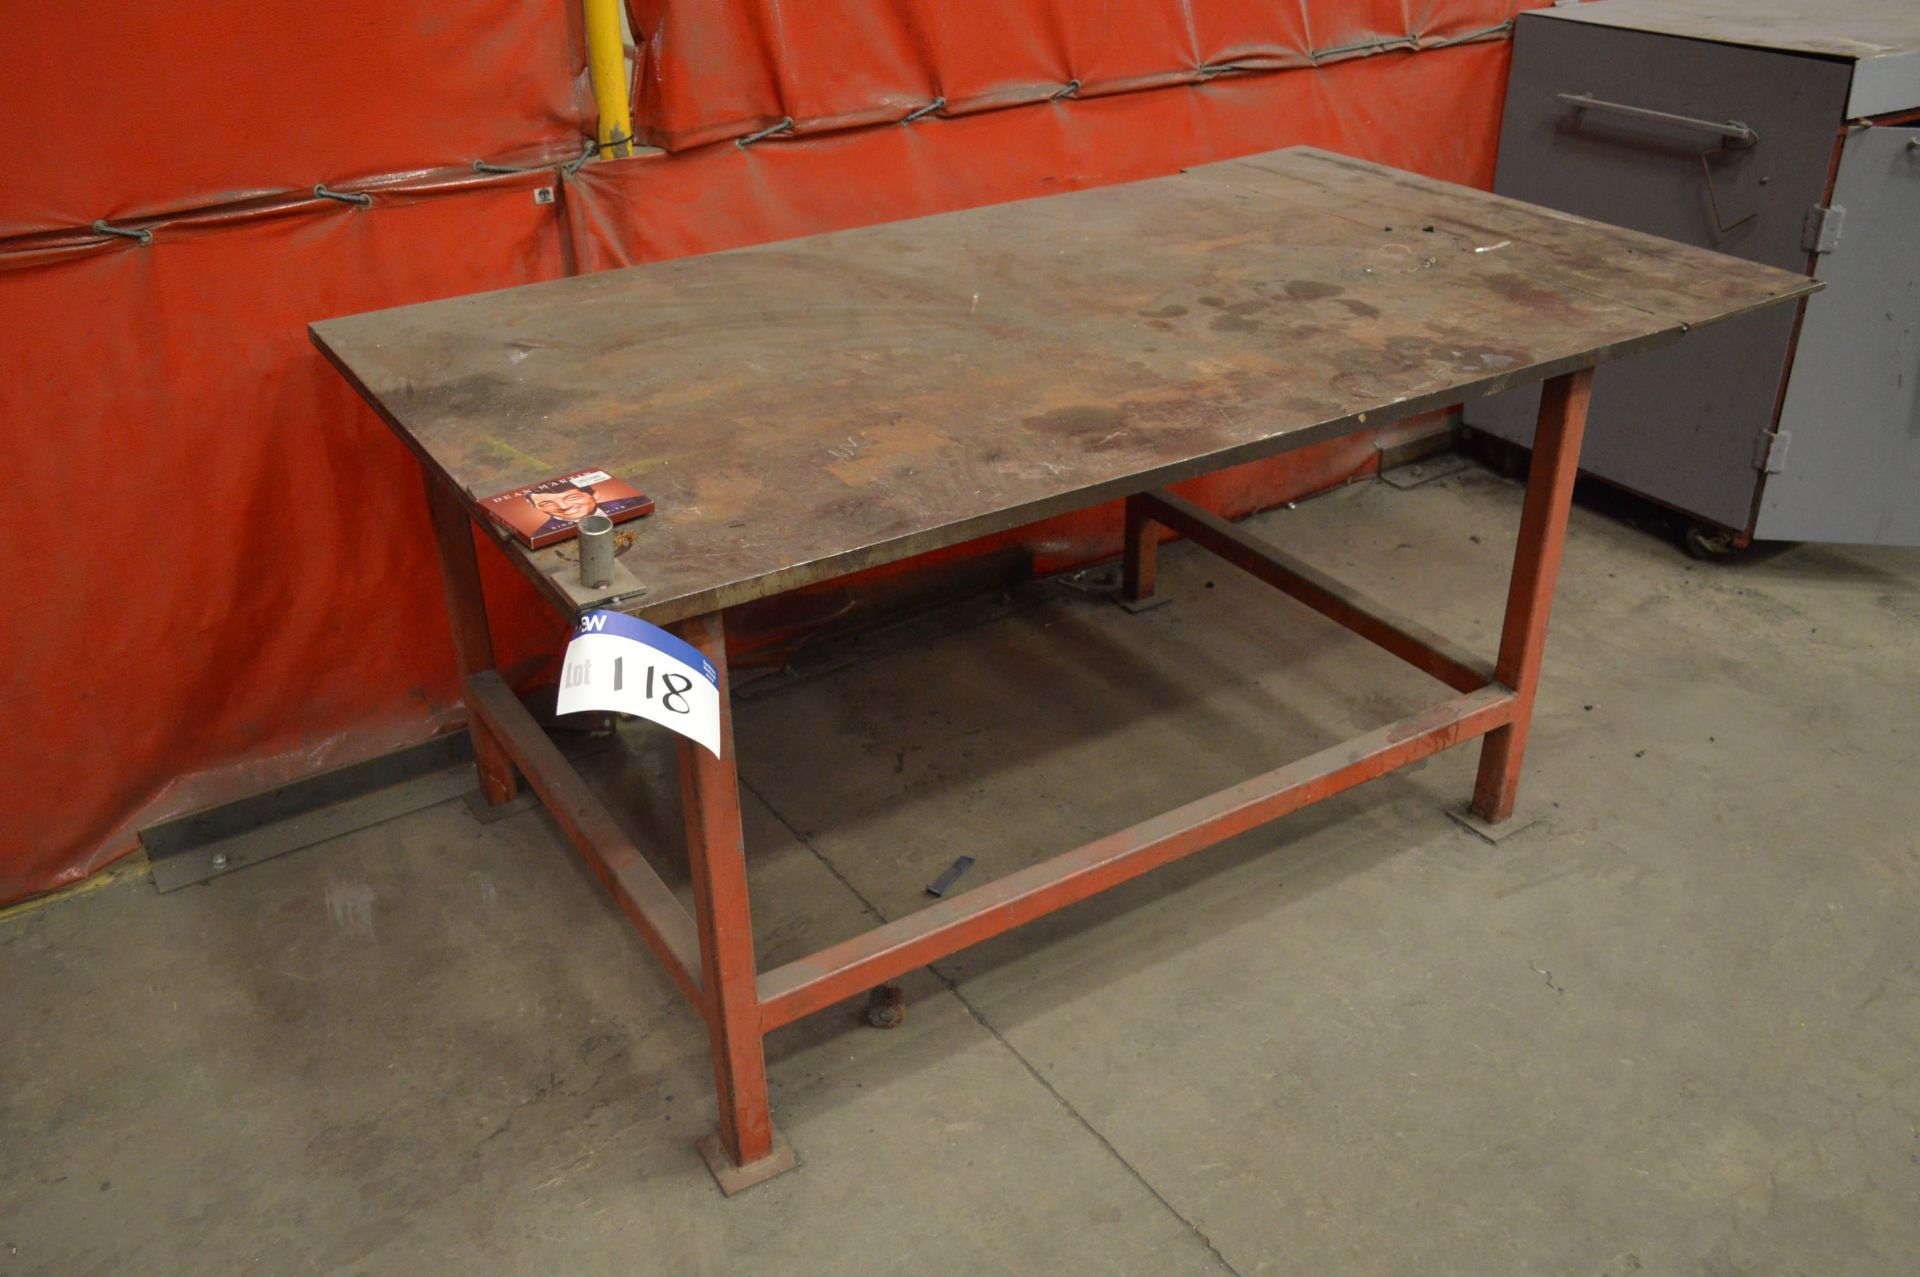 Fabricated Steel Bench, approx. 1.84m x 1.1m, with plate steel top